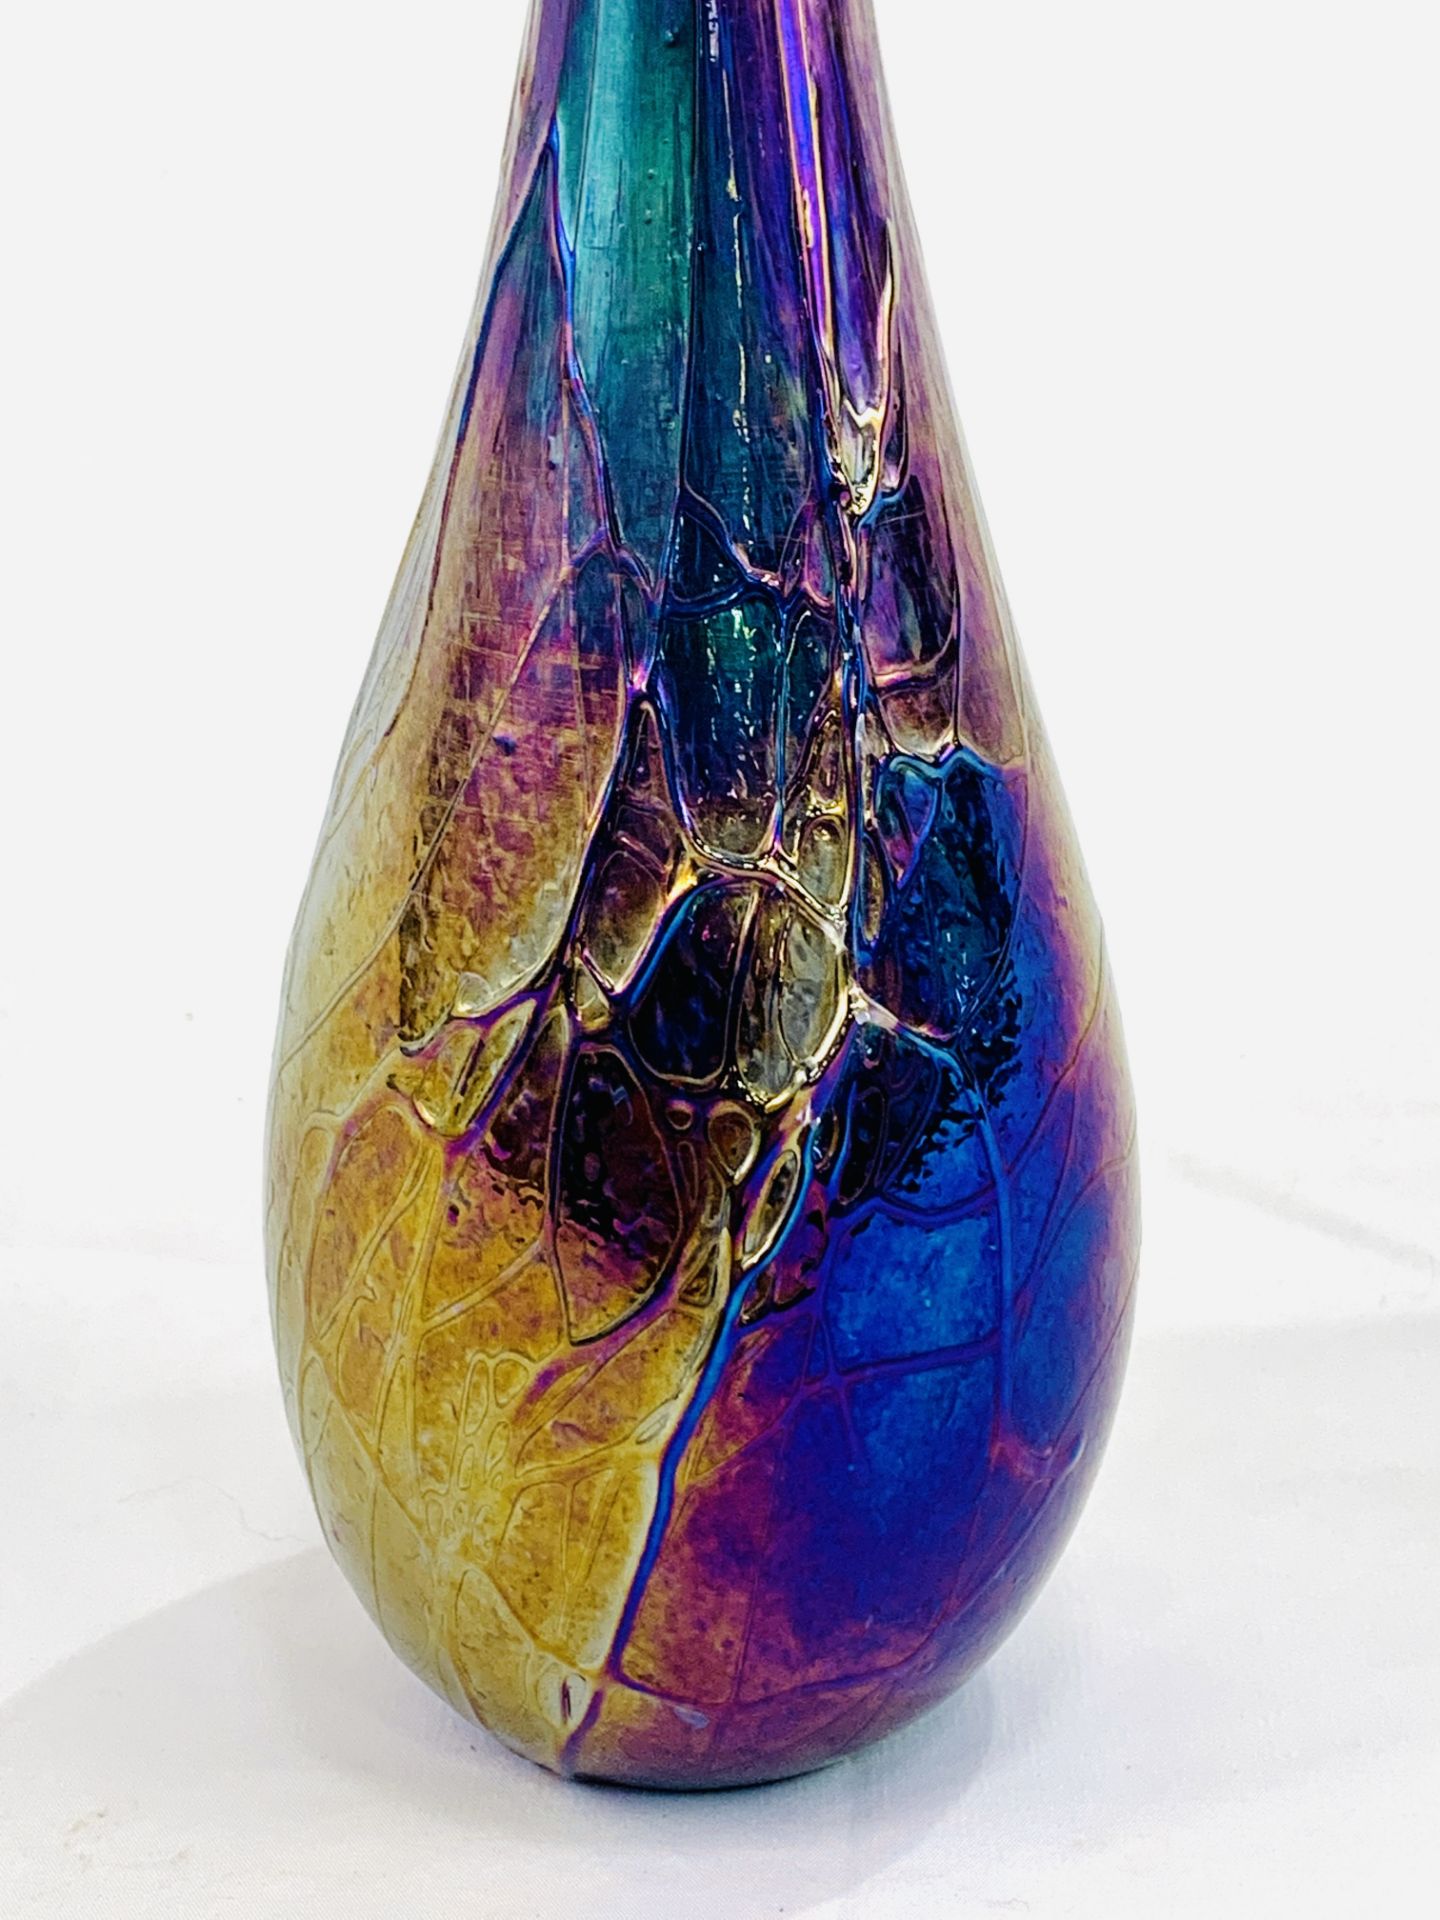 Tall bud vase by Glasform, signed J Ditchfield - Image 2 of 3